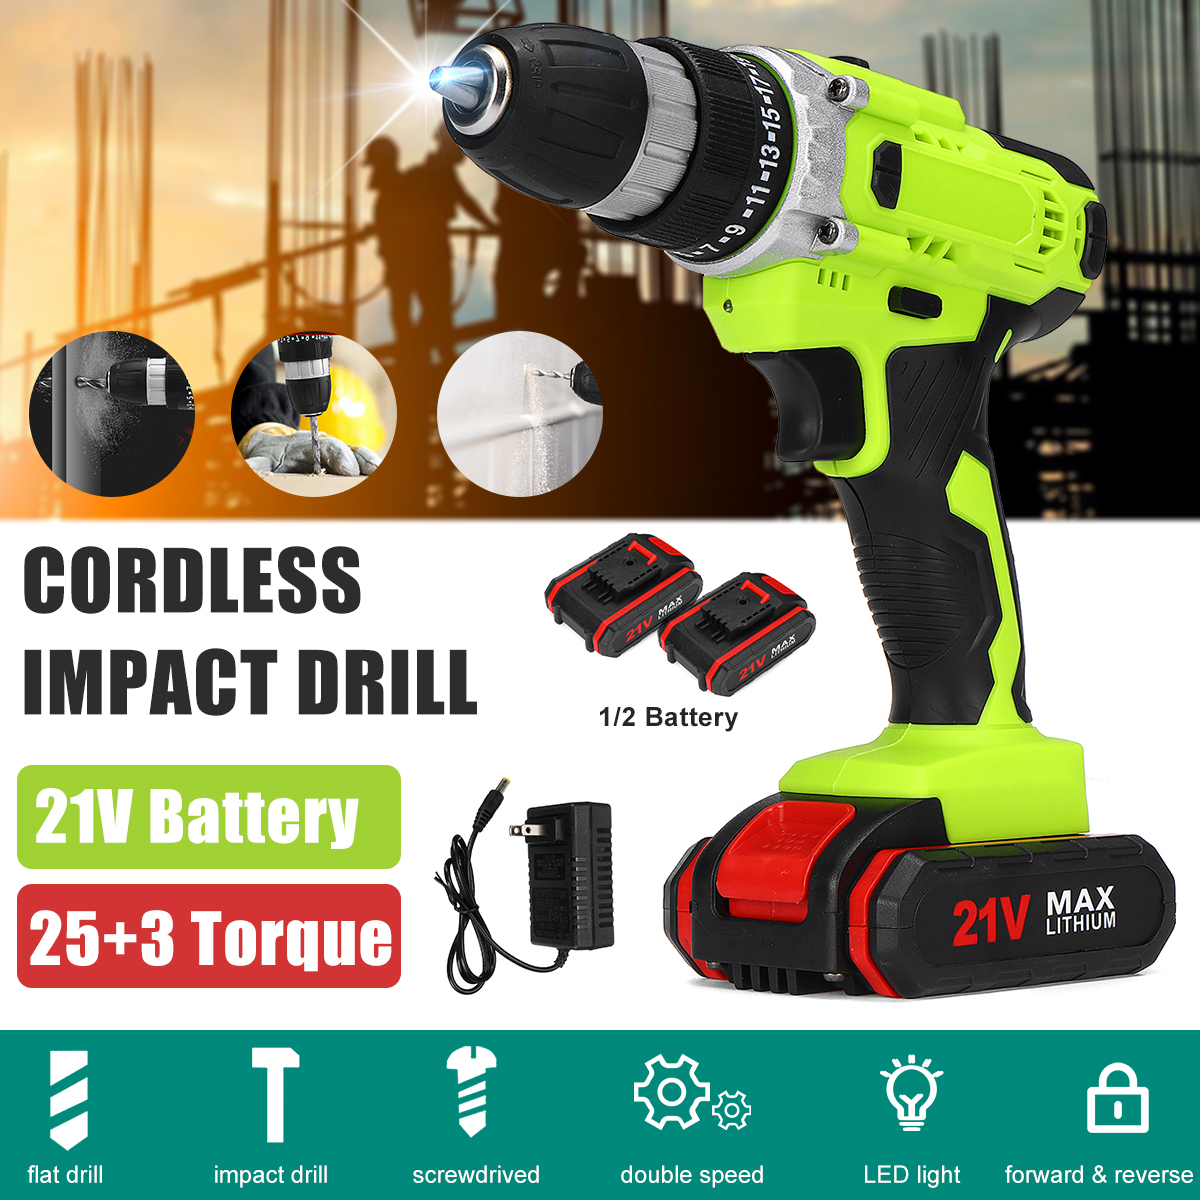 21V-Cordless-Impact-Drill-Set-3-IN-1-Electric-Torque-Wrench-Screwdriver-Drill-W-1-Or-2-Battery-Comes-1837421-1